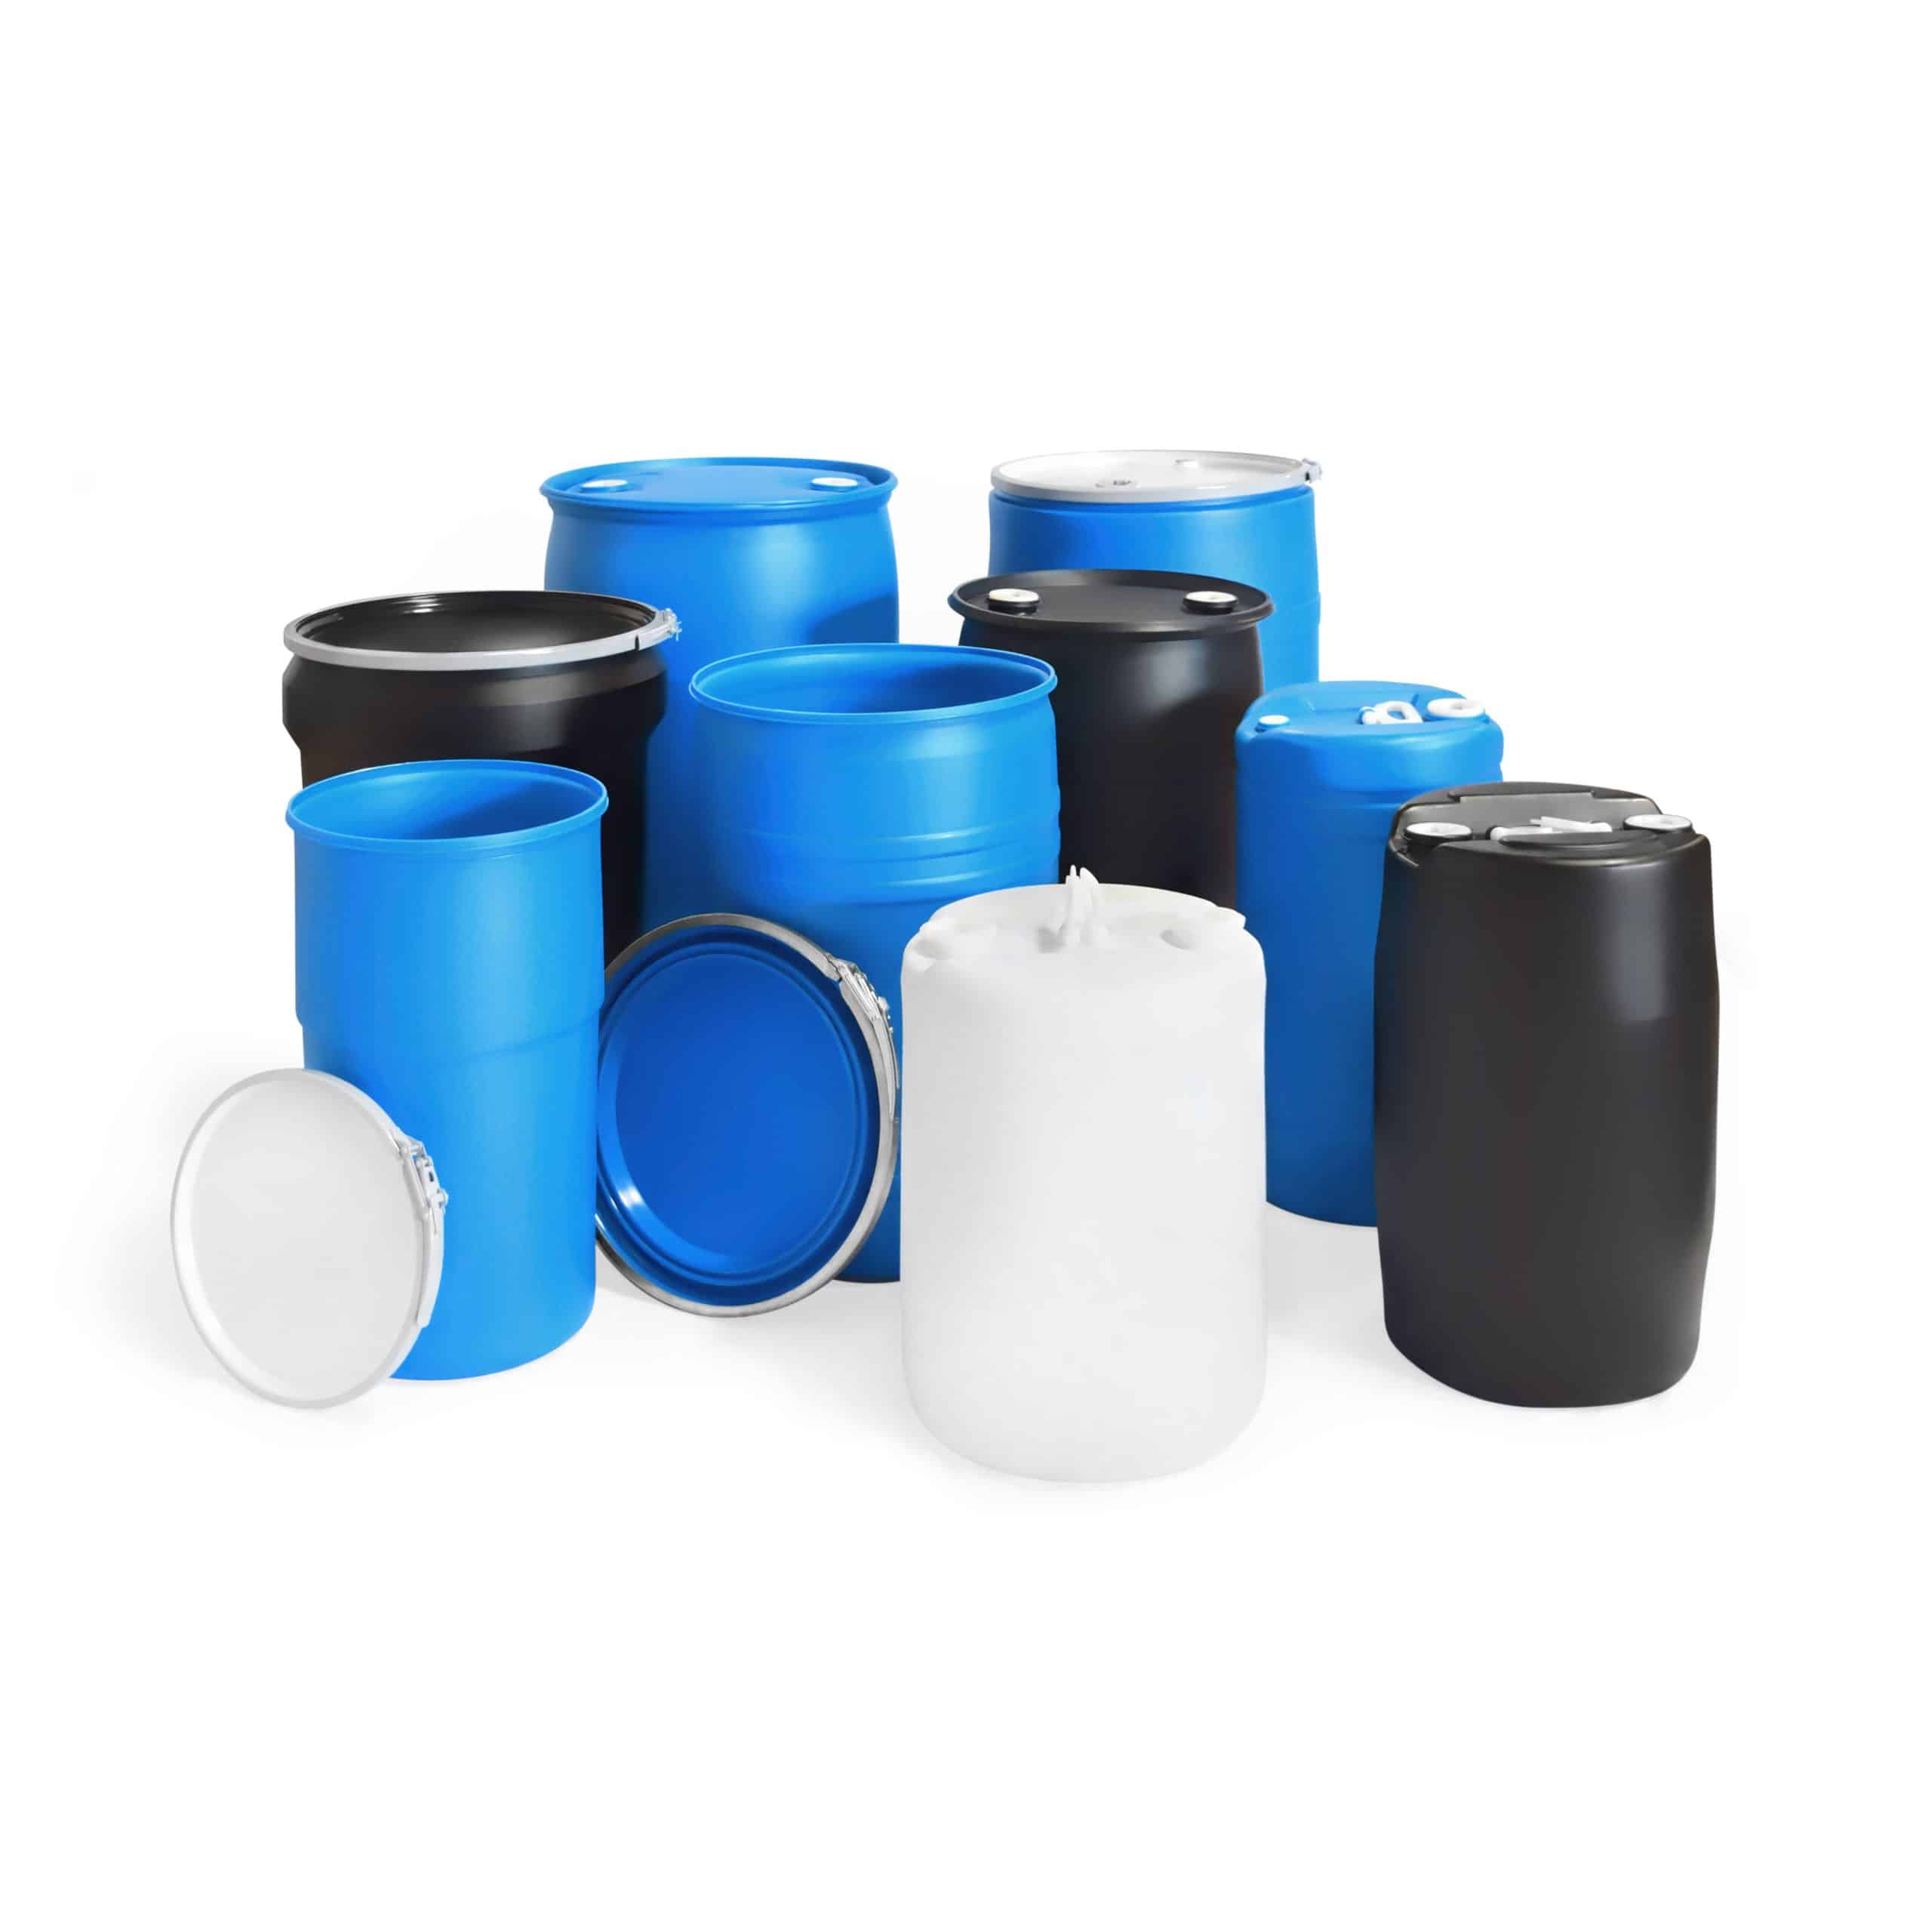 Plastic Drums, A circularity success story